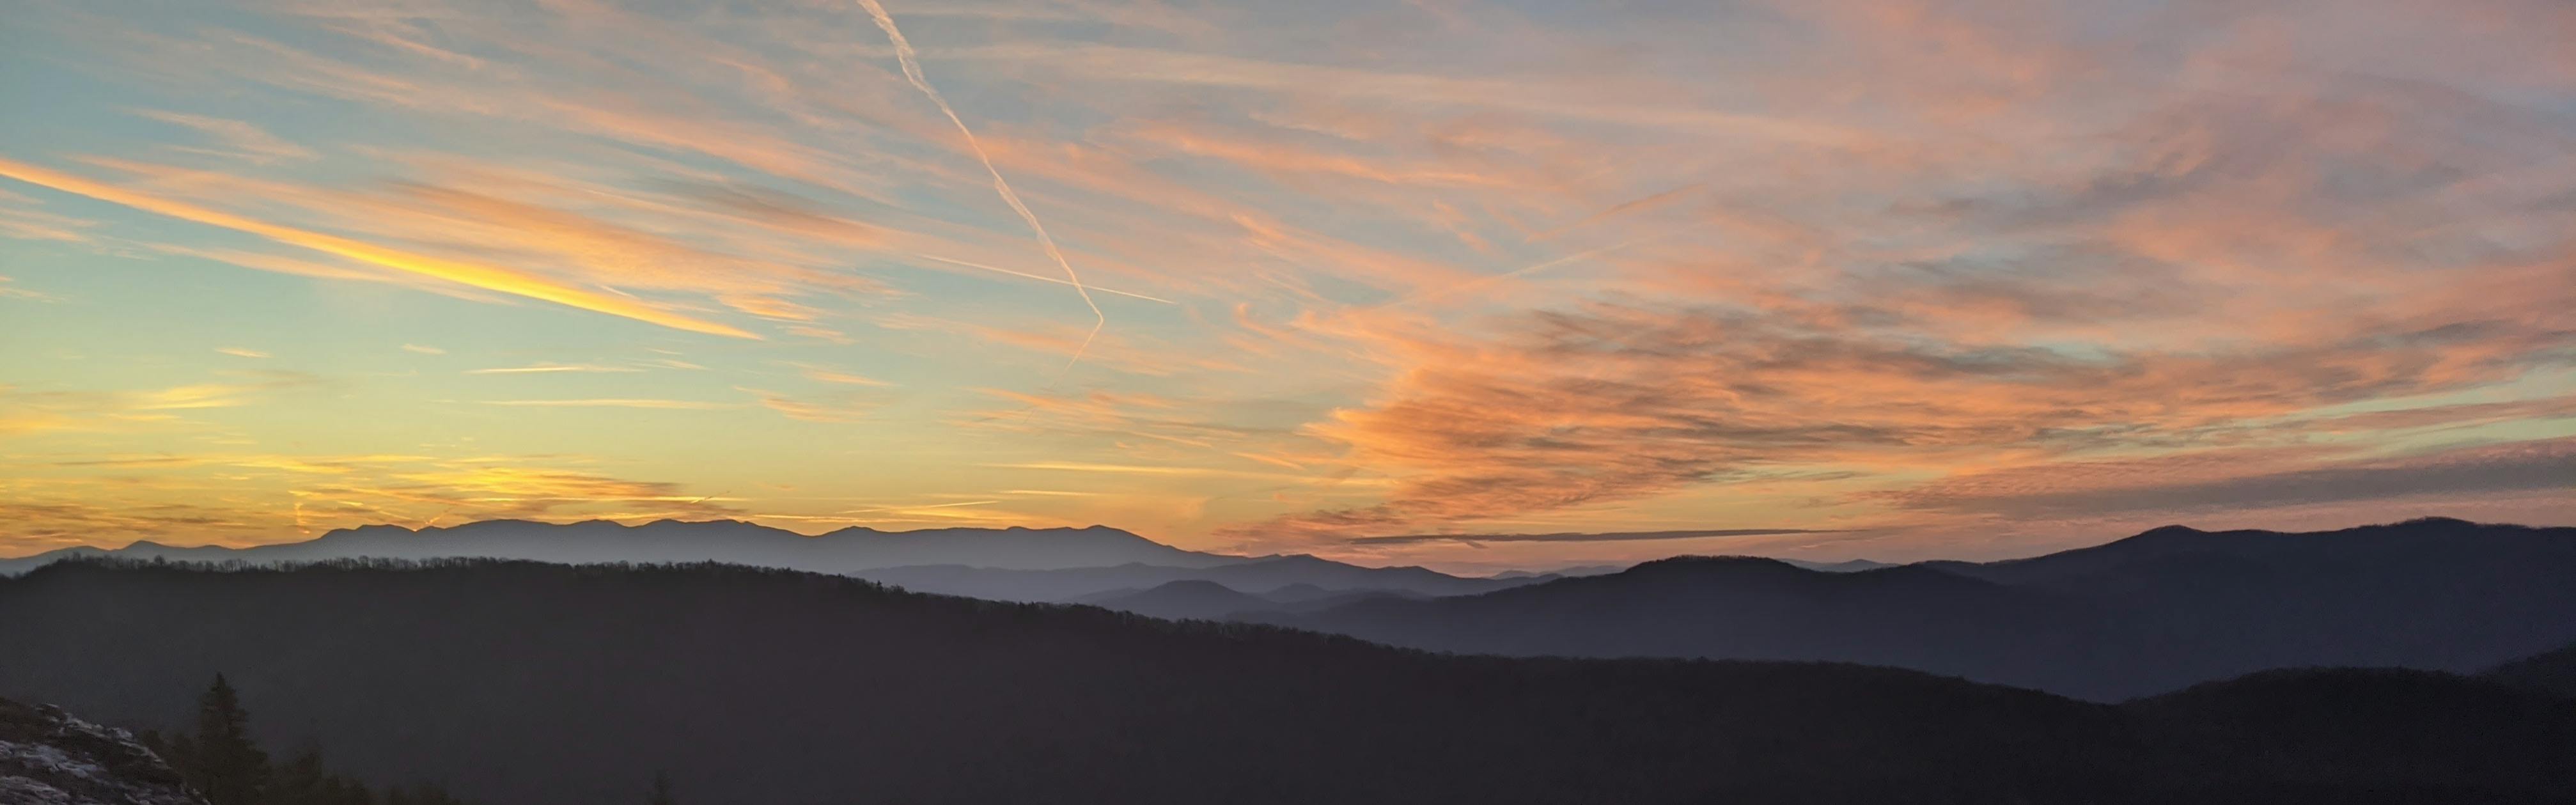 A “typical” Western North Carolina sunset from the Chimneys in Linville Gorge